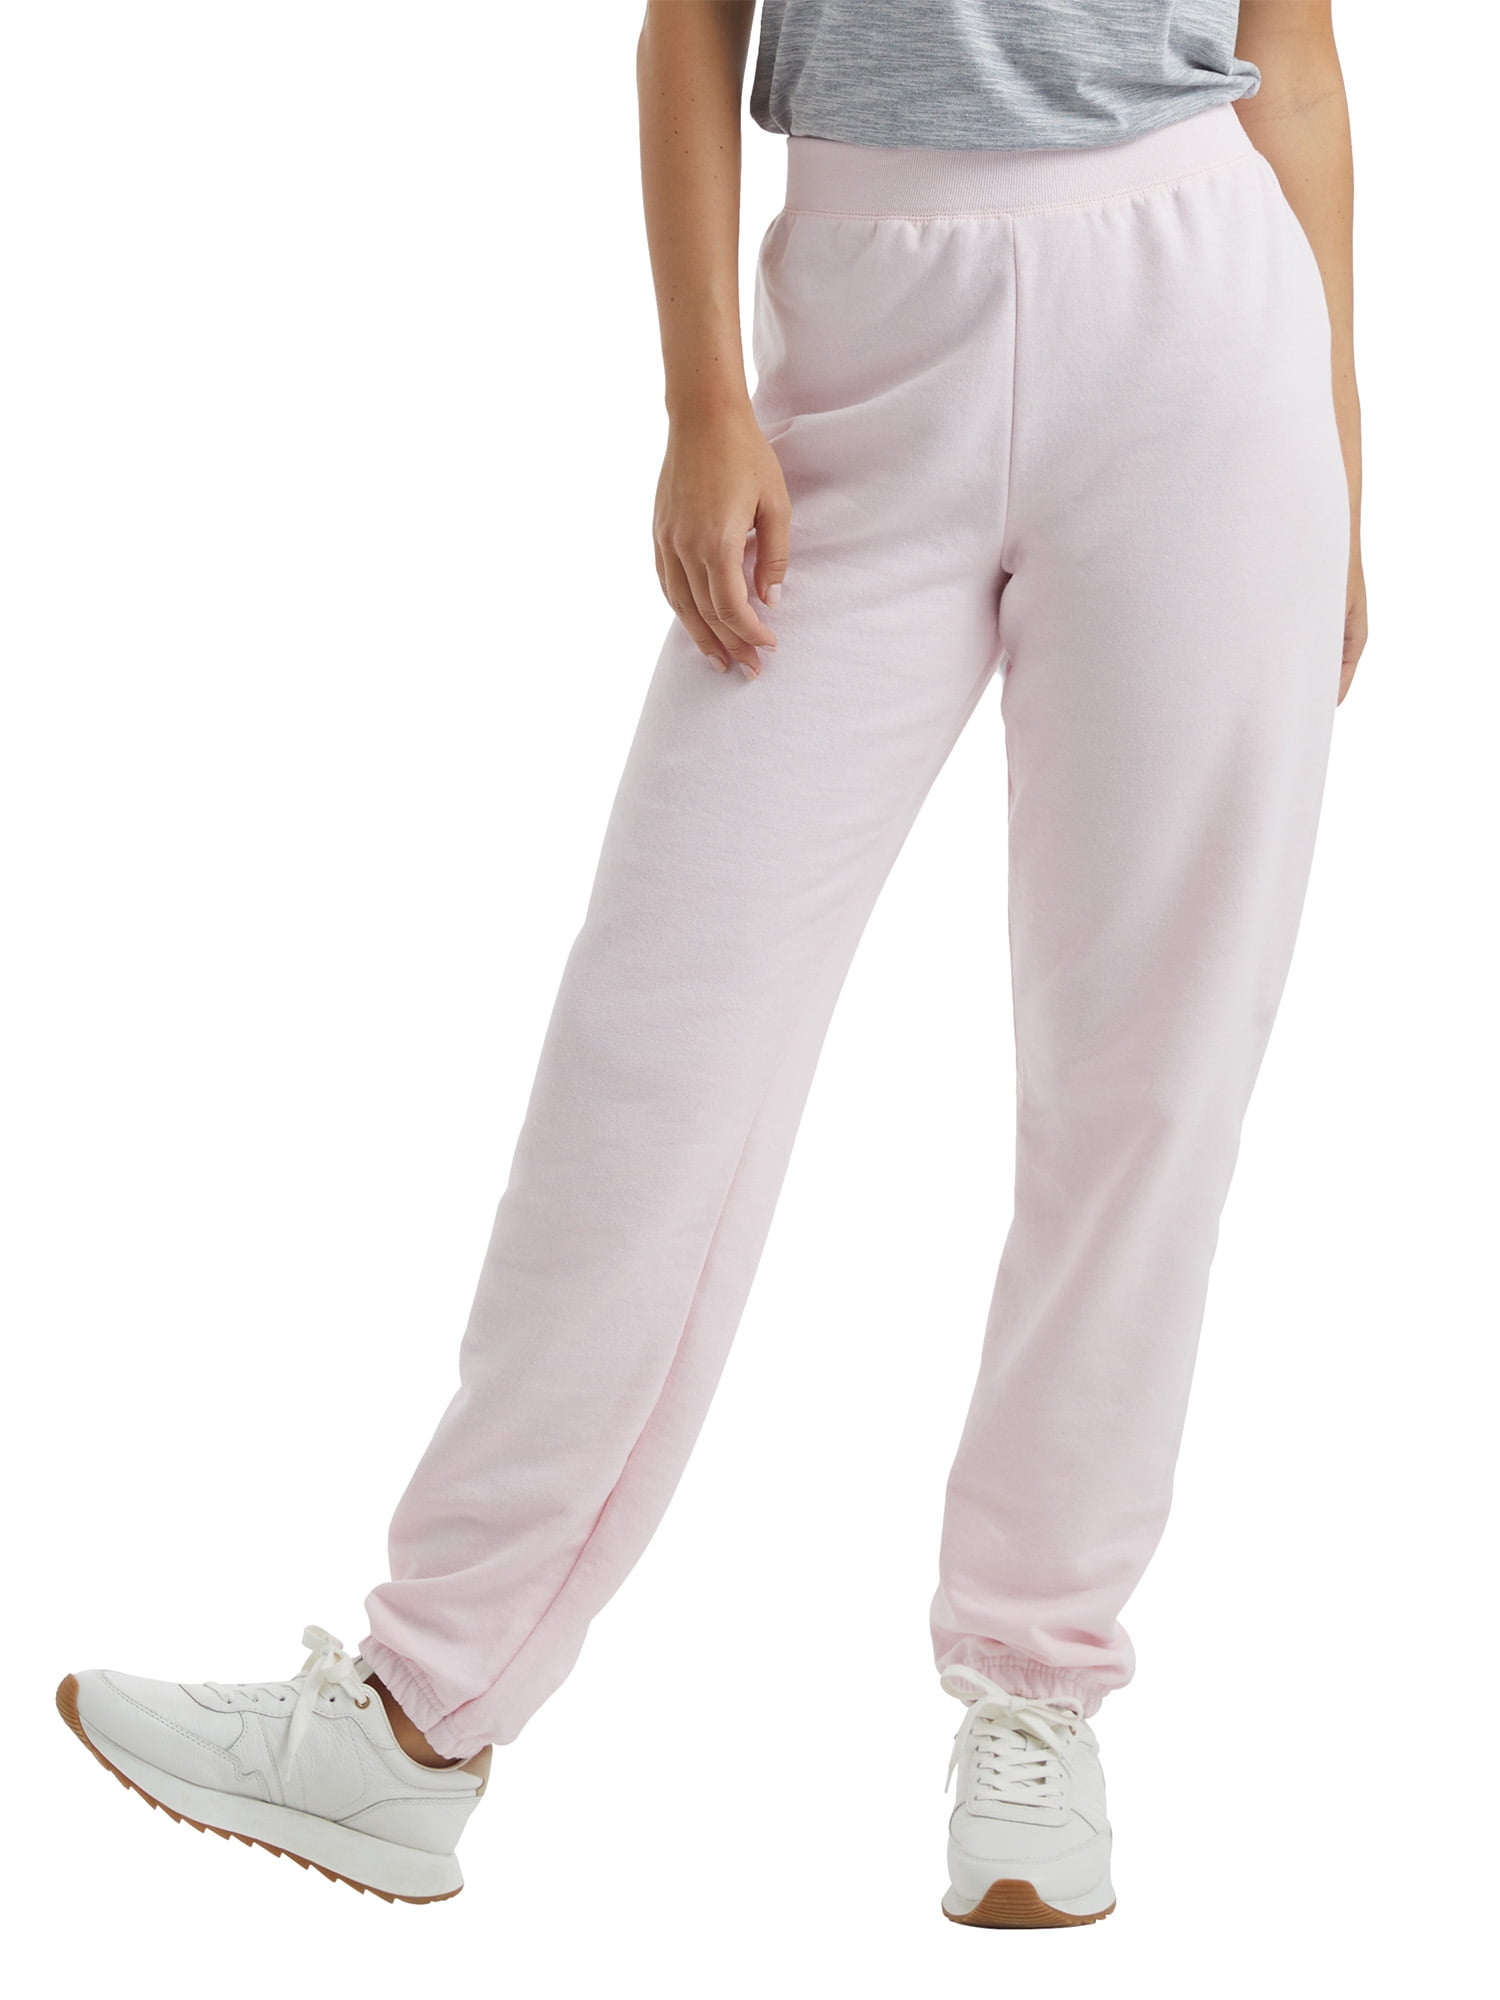 Women's/ Sweatpants by Hanes Size XXL Gray in Color RN 15763